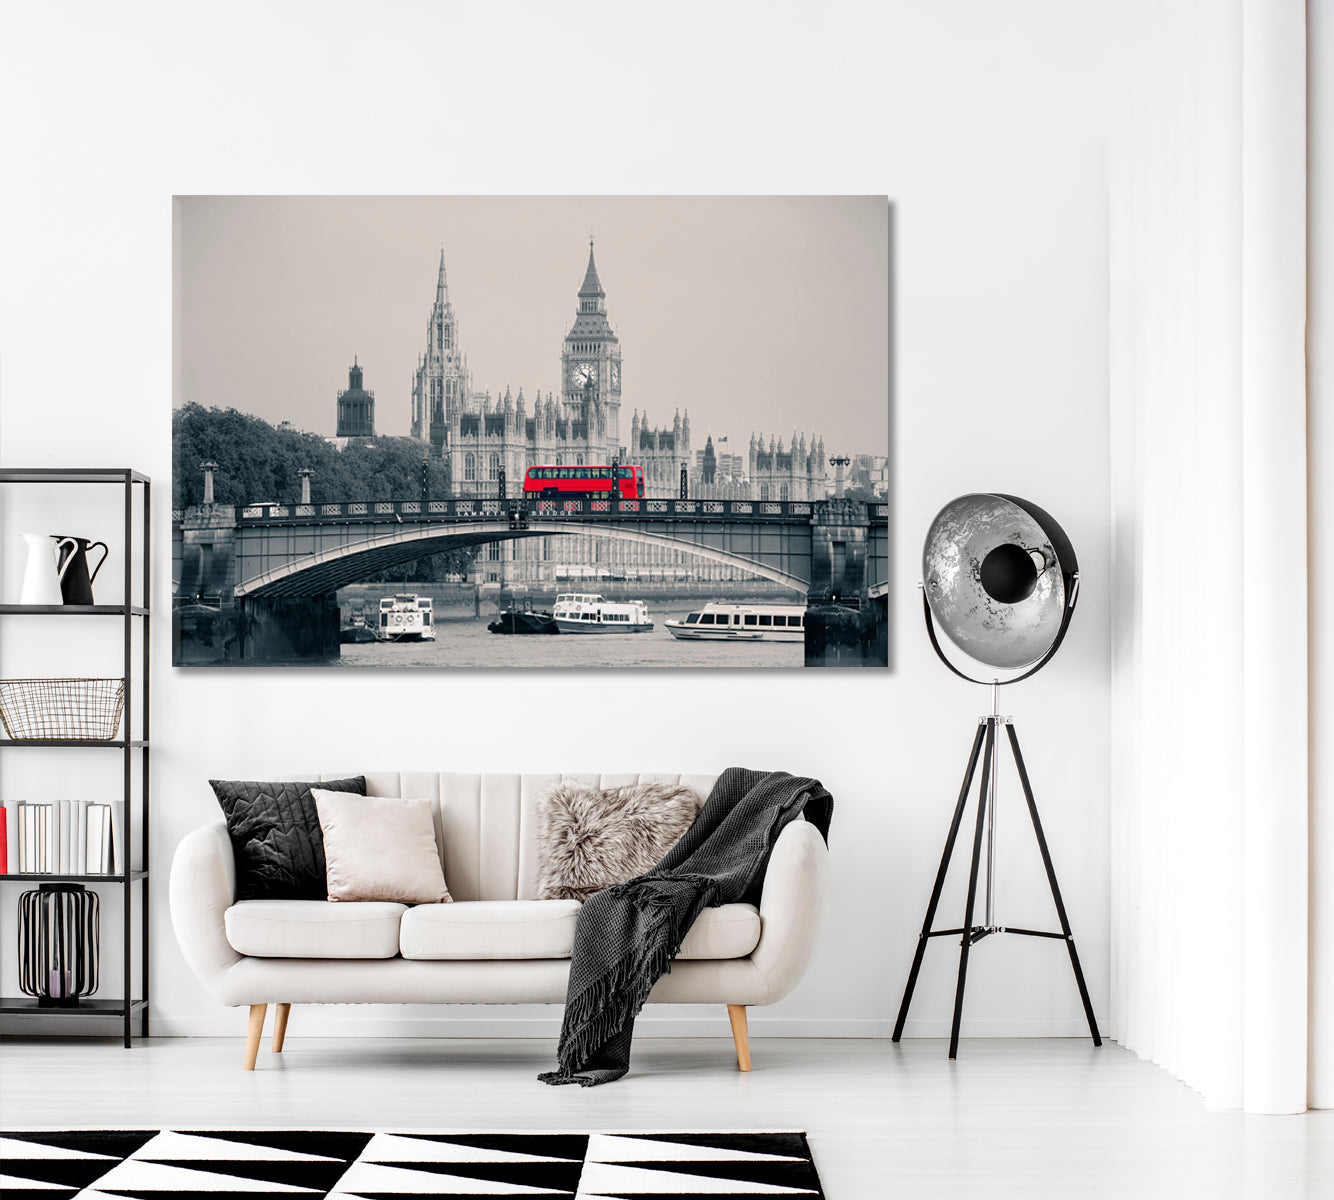 Lambeth Bridge with Red Bus London Canvas Print ArtLexy 1 Panel 24"x16" inches 